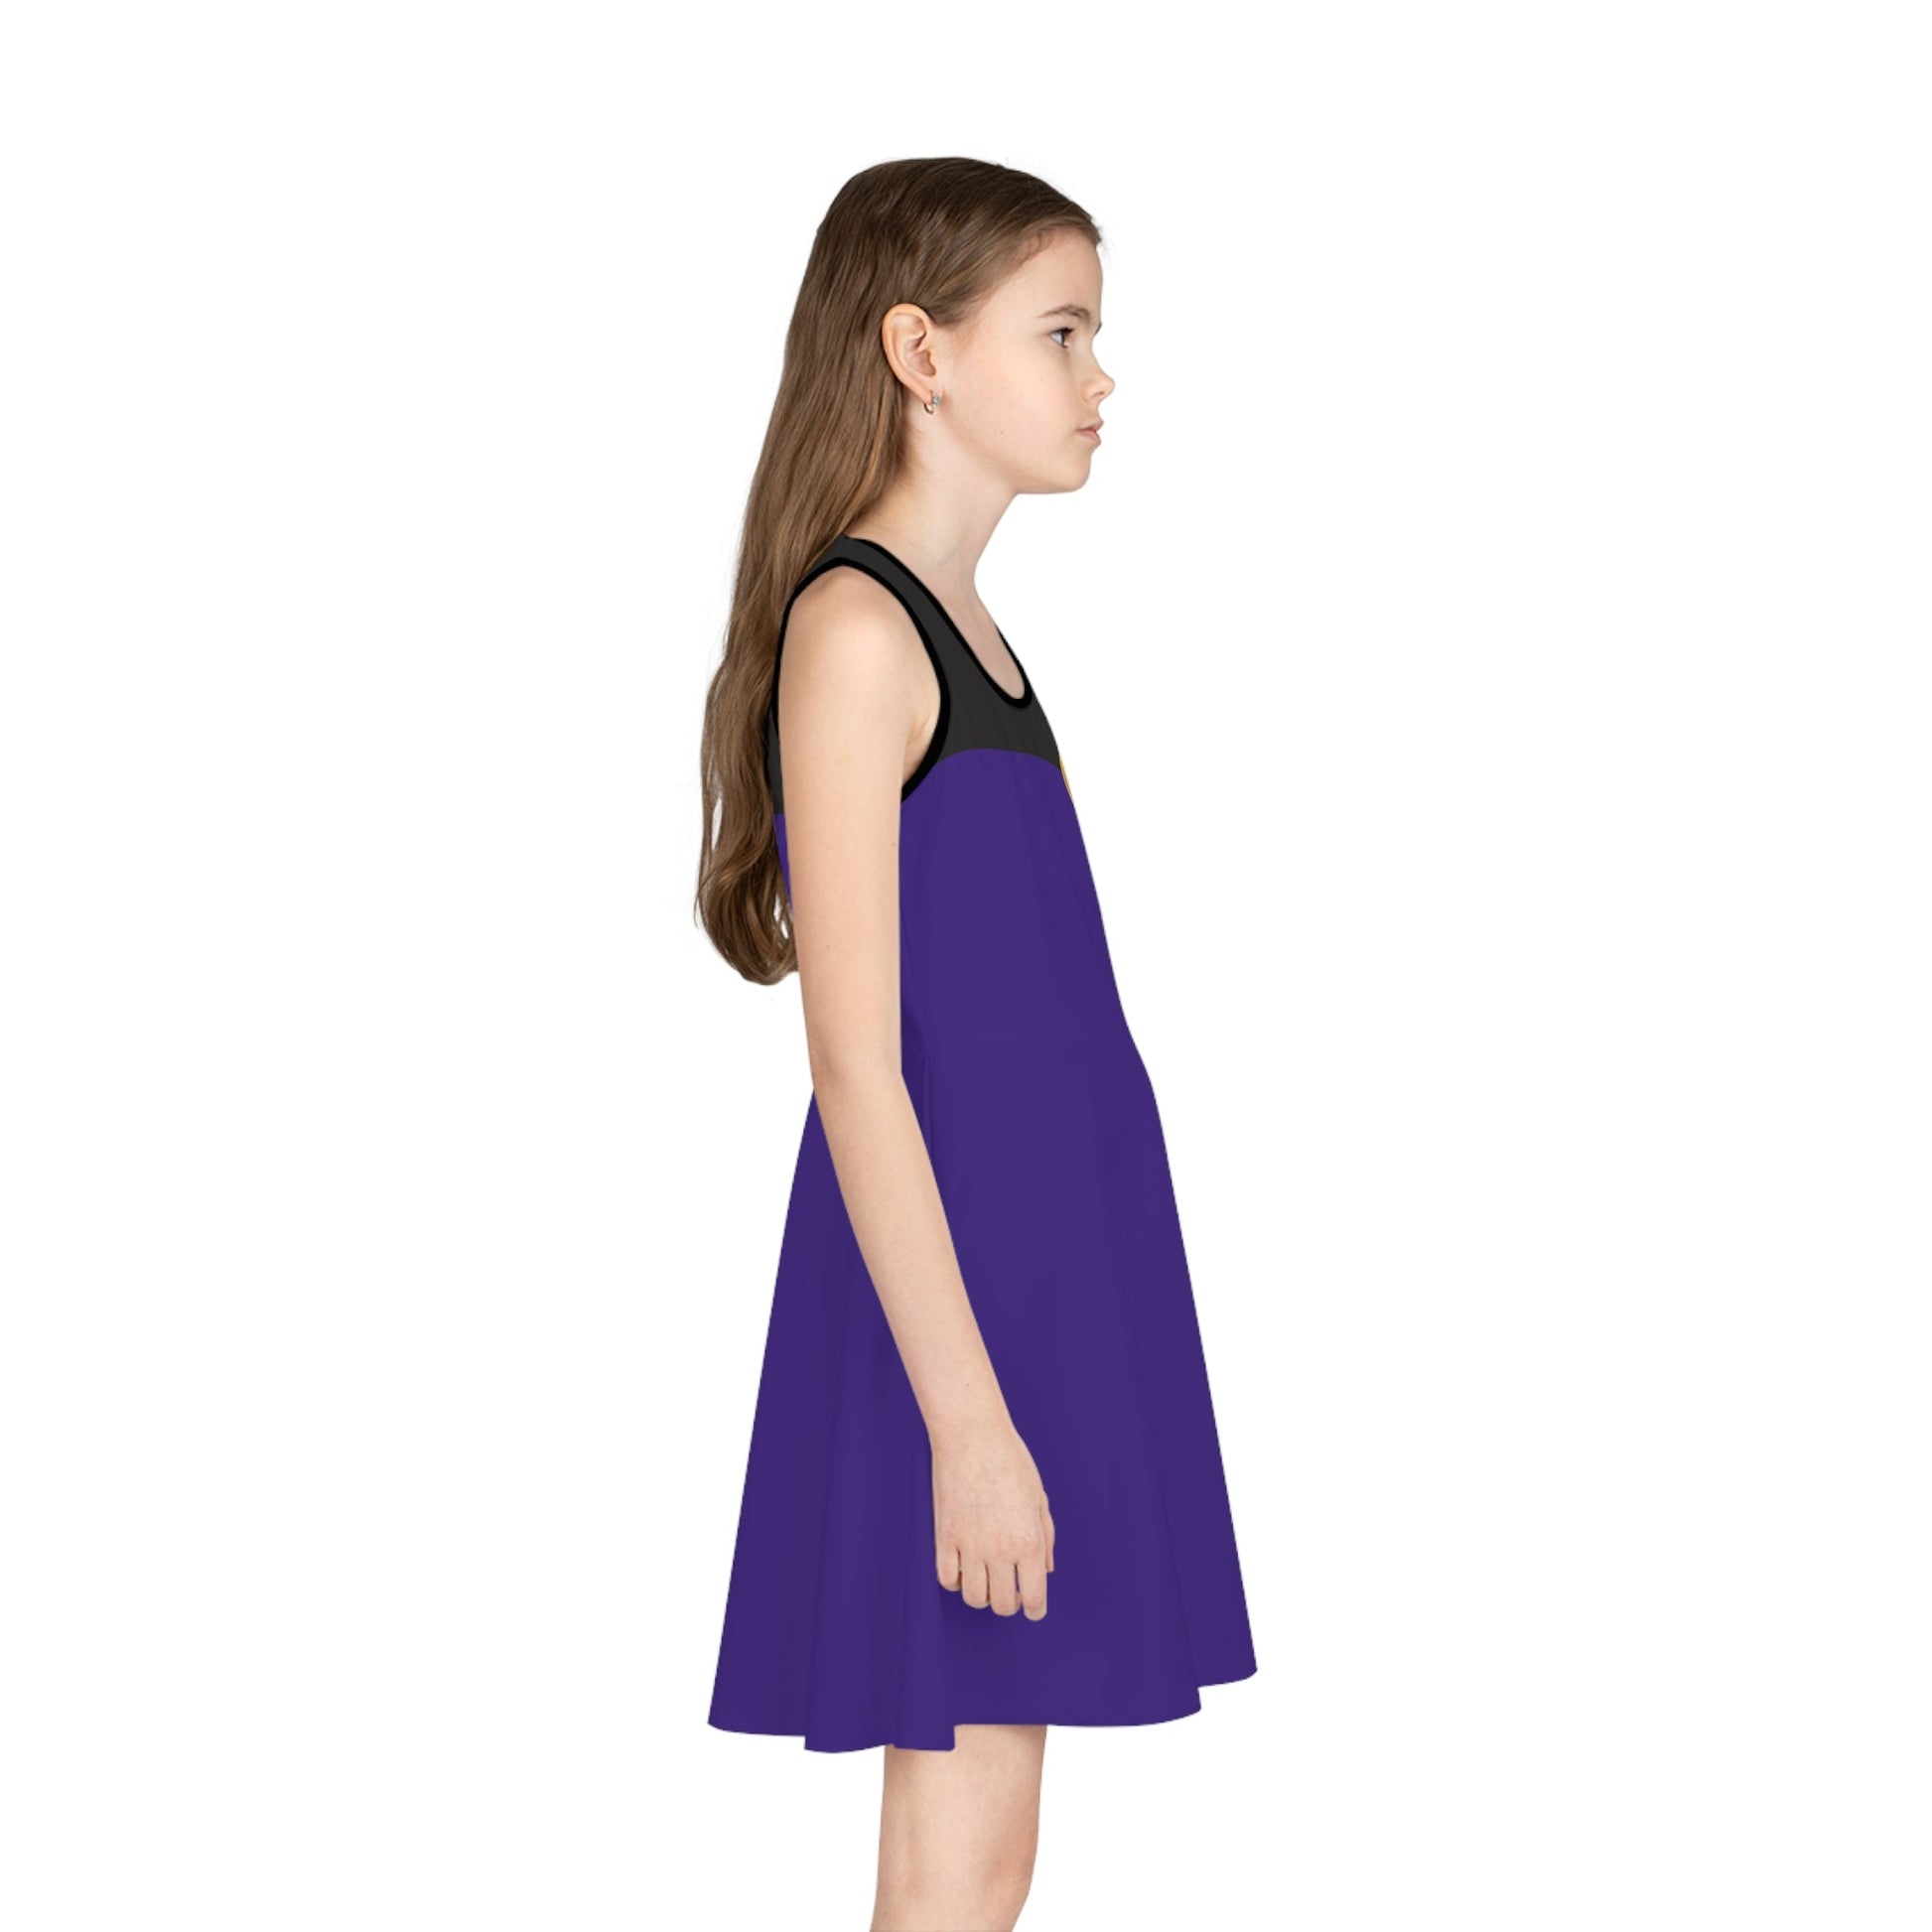 Evil Queen Girls' Sleeveless Sundress All Over PrintAOPAOP Clothing#tag4##tag5##tag6#